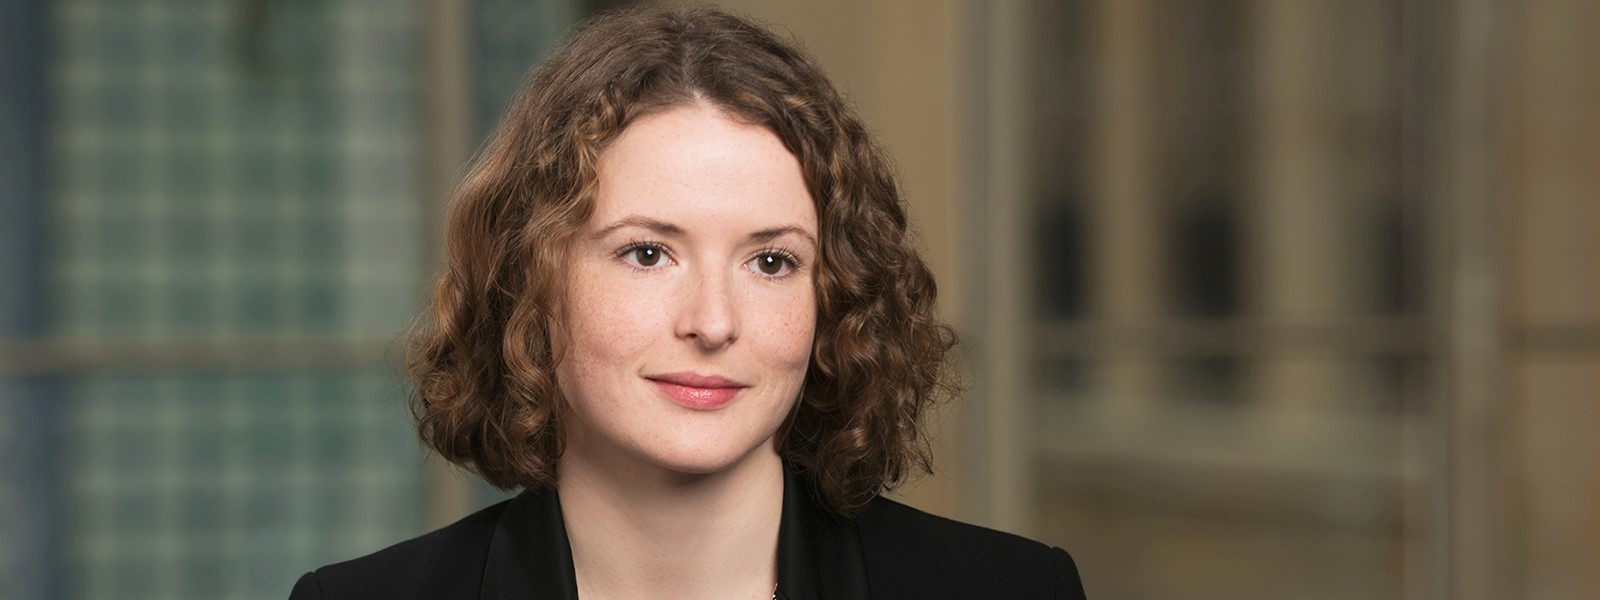 Interviews with Our Editors: In Conversation with Gwen de Vries, Director,  International Group Content & Market Development at Wolters Kluwer Legal &  Regulatory, U.S. - Kluwer Arbitration Blog